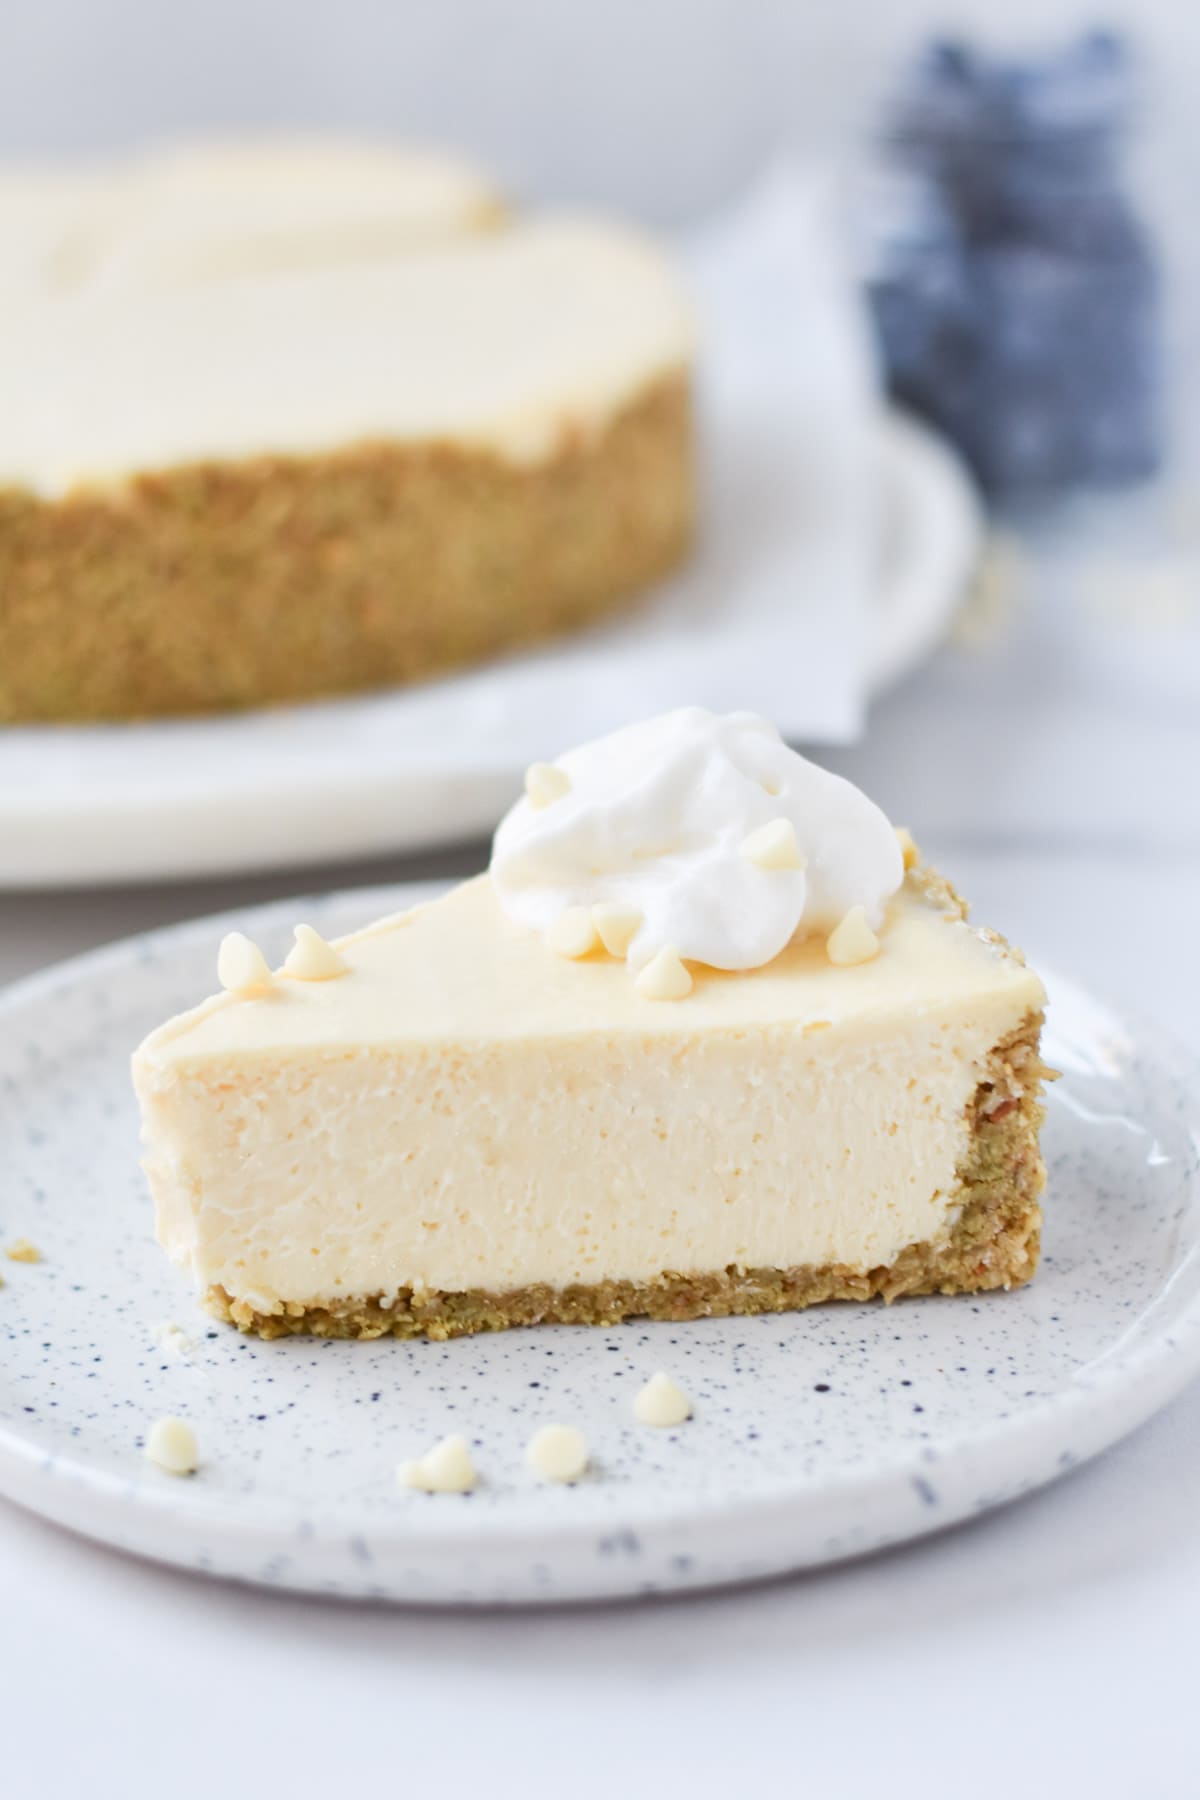 A slice of white chocolate cheesecake with white chocolate sprinkled around.